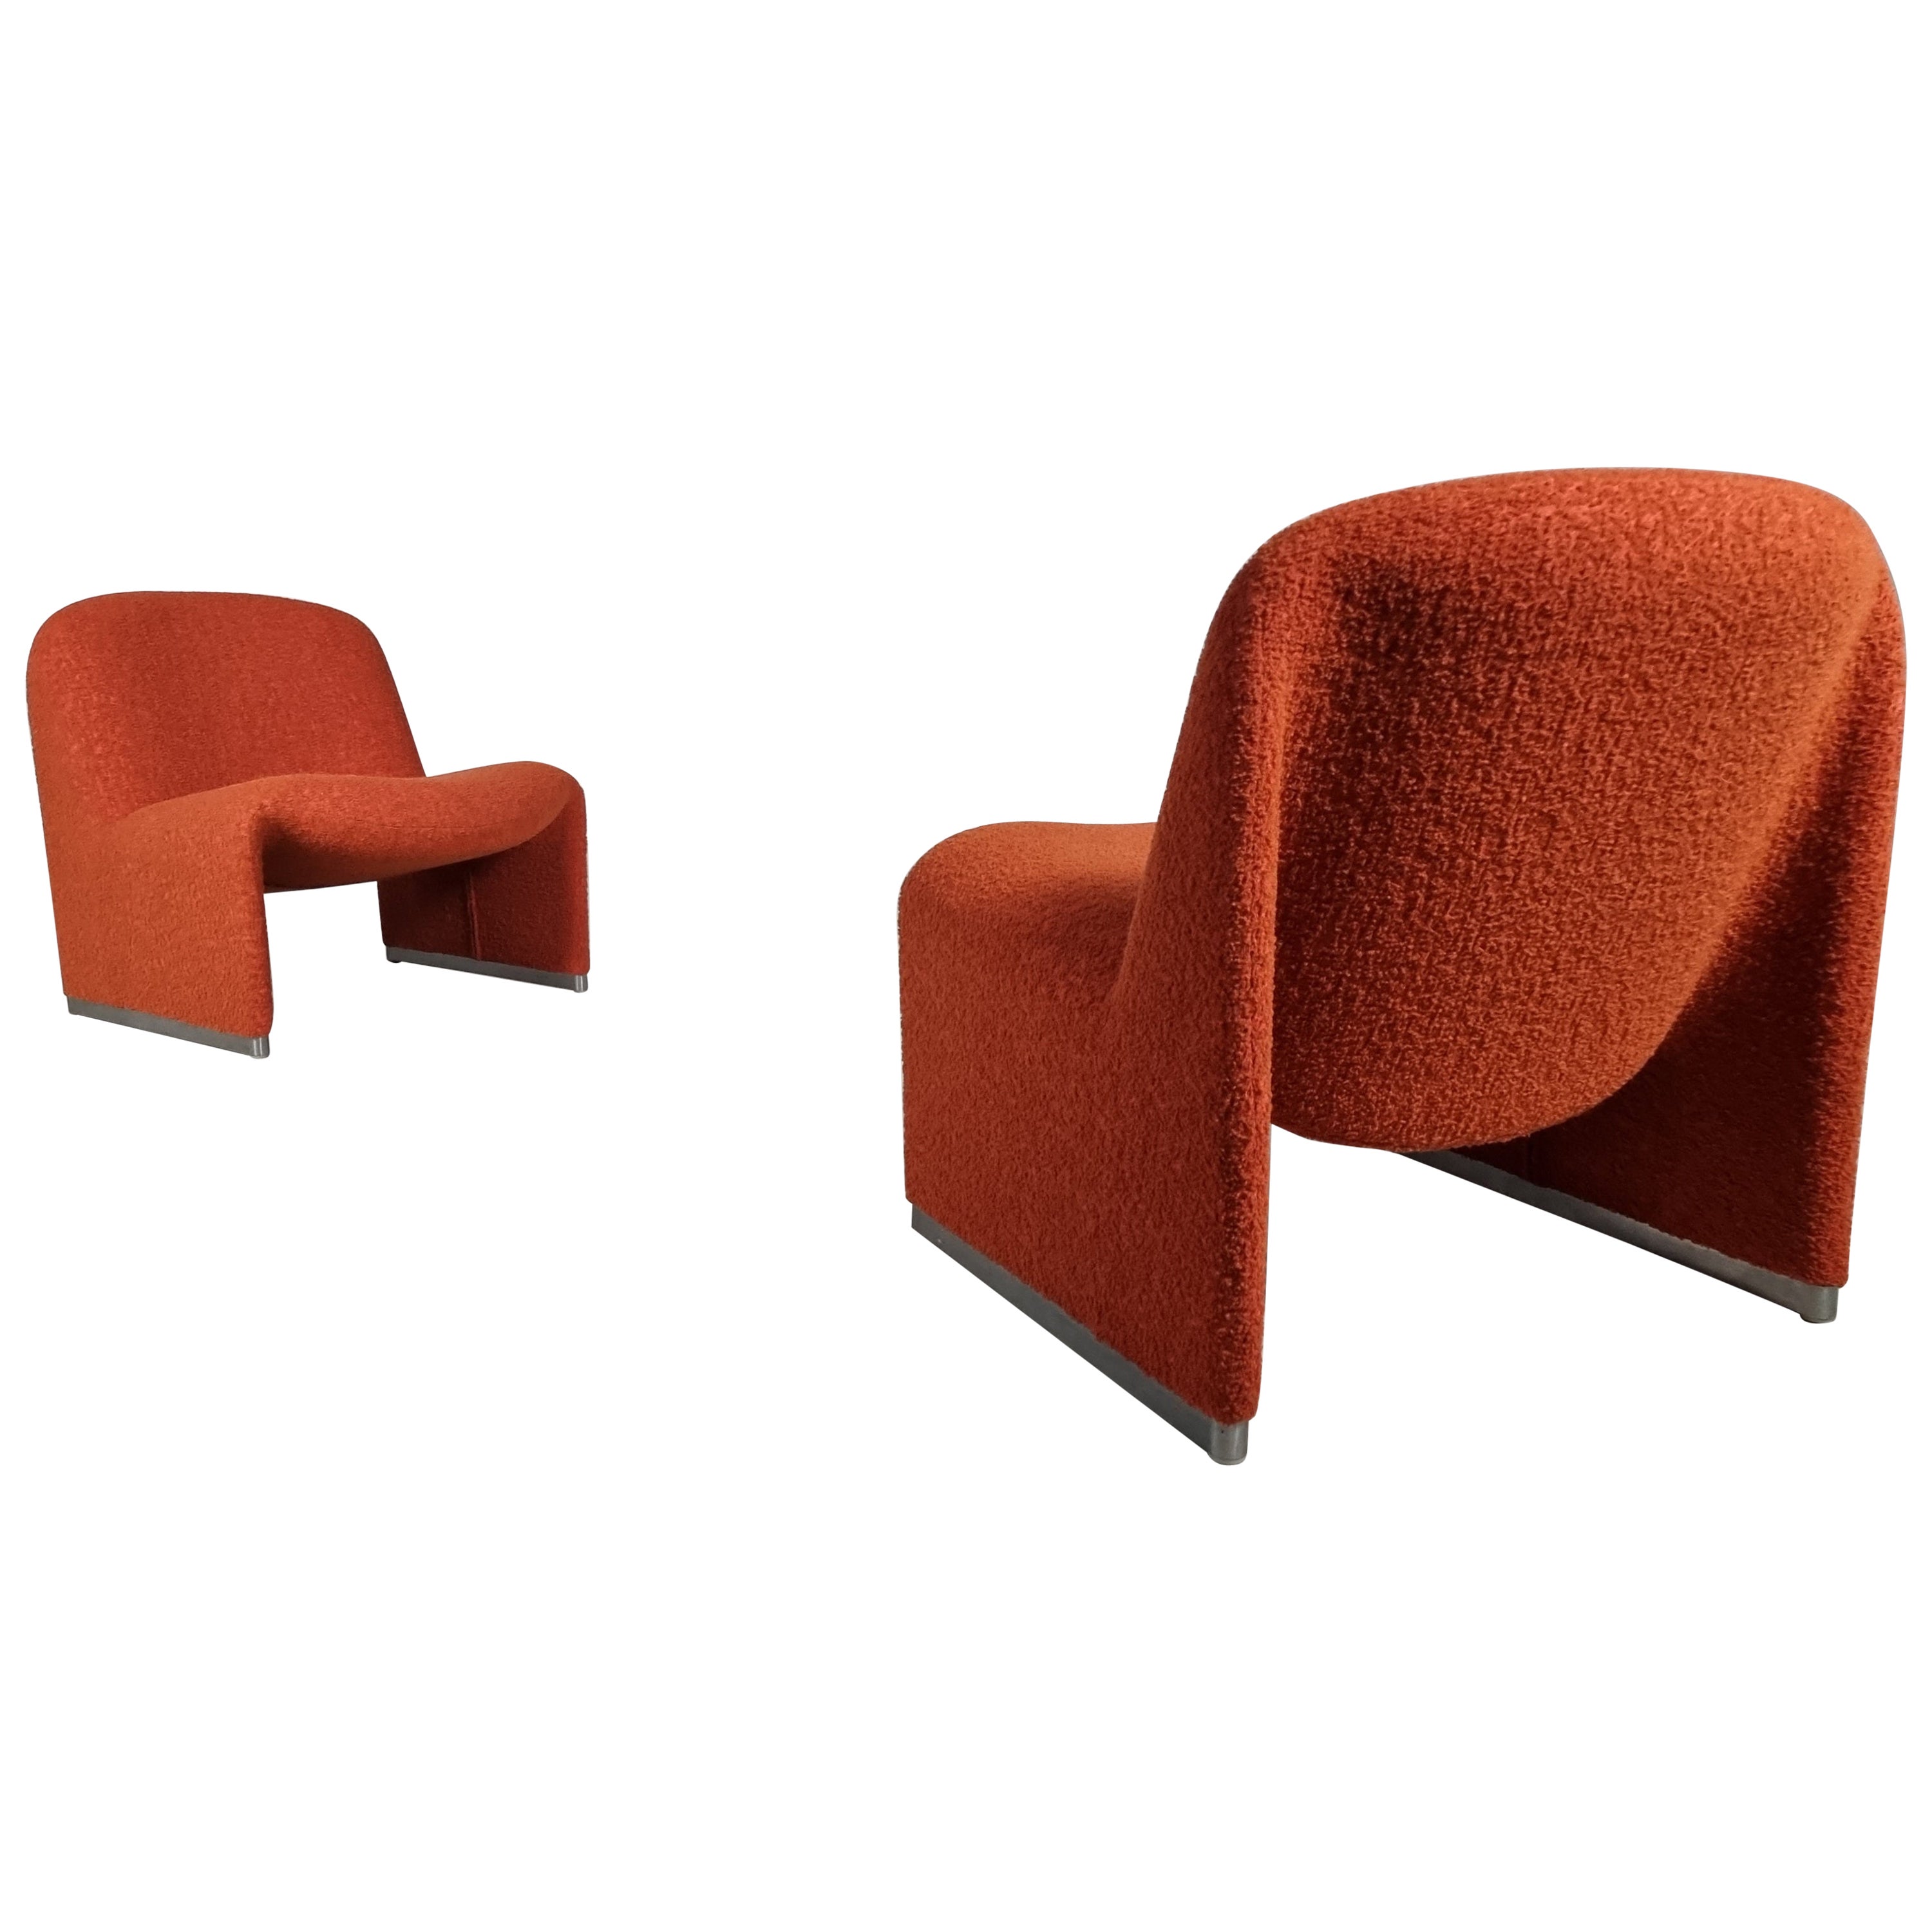 Set of 2 Alky Chairs in orange/red boucle, Giancarlo Piretti for Castelli, 1970